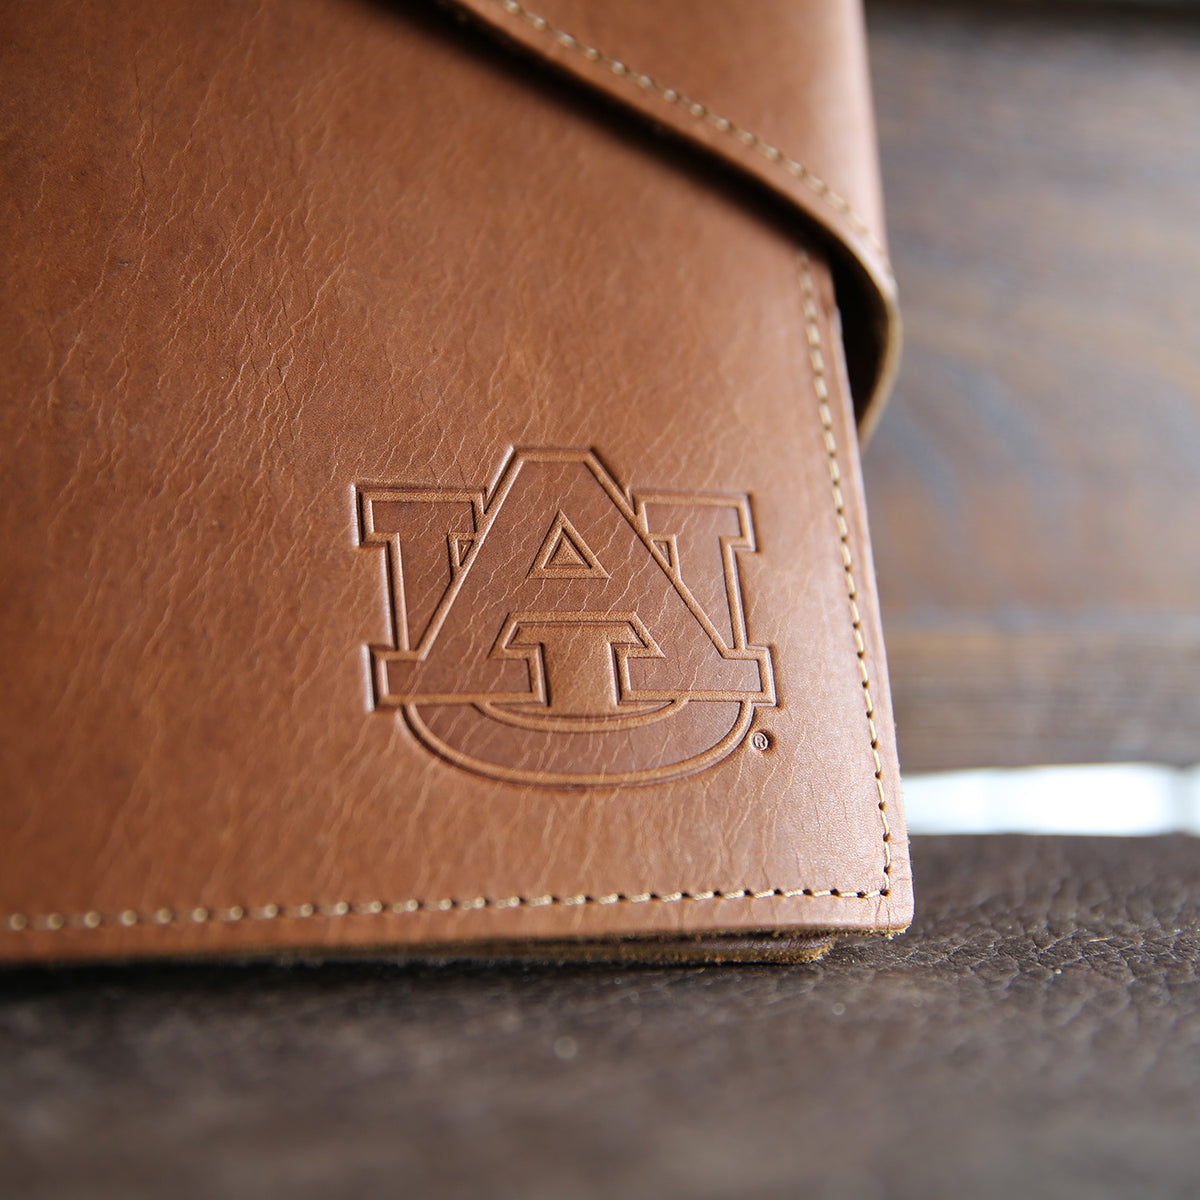 The Officially Licensed Auburn Langley Fine Leather 3 Ring Binder, Notebook, Photo Album, 1.5″ Binder